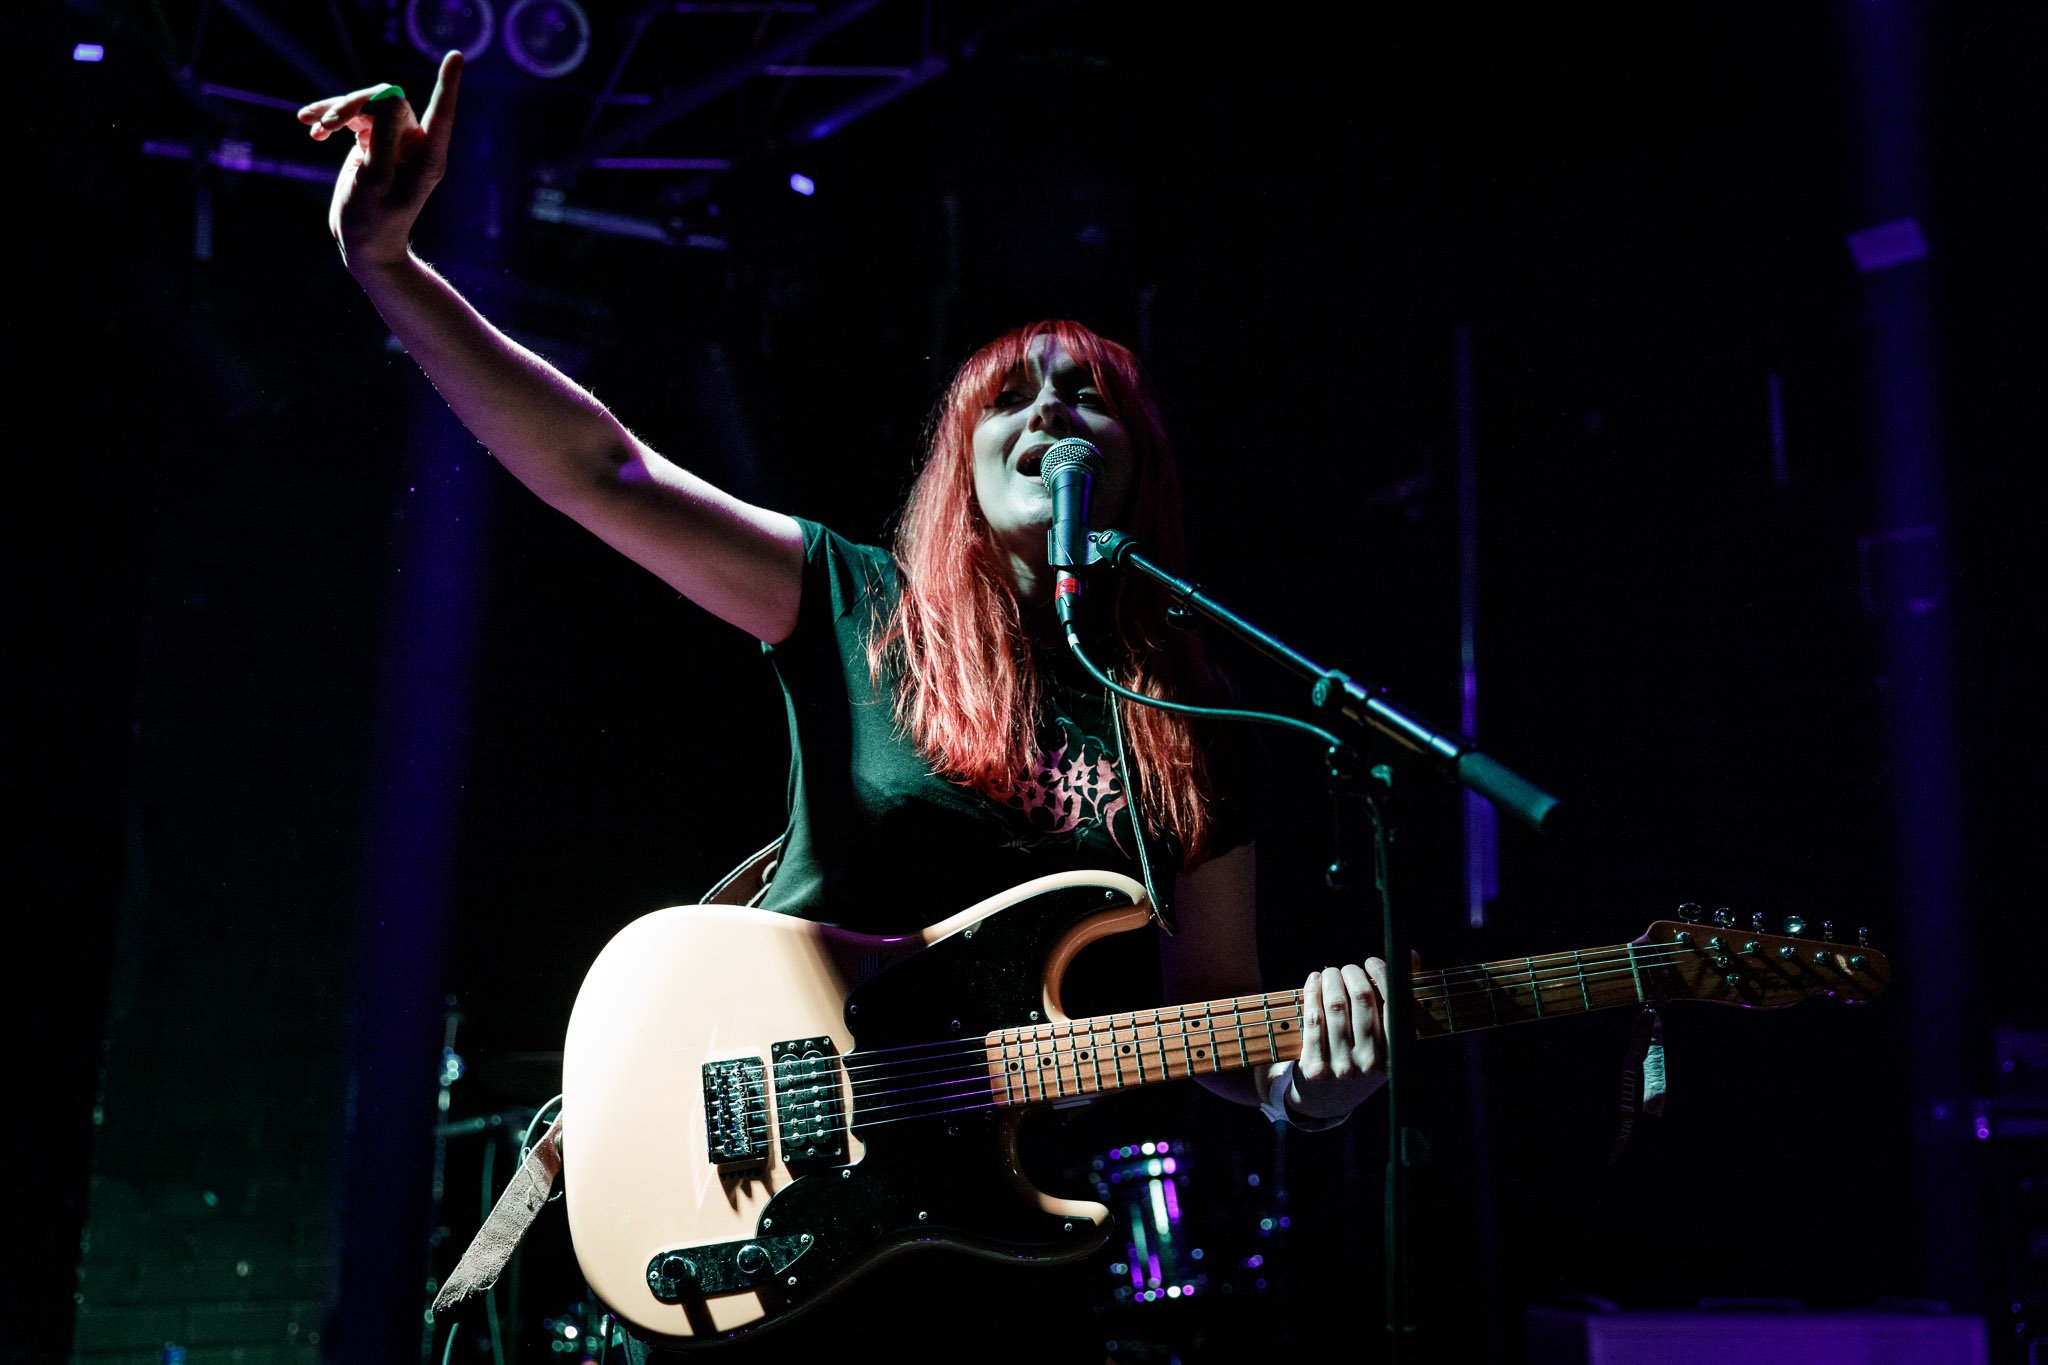 Scarlet at The Live Rooms in Chester on October 23rd 2022 ©Joha